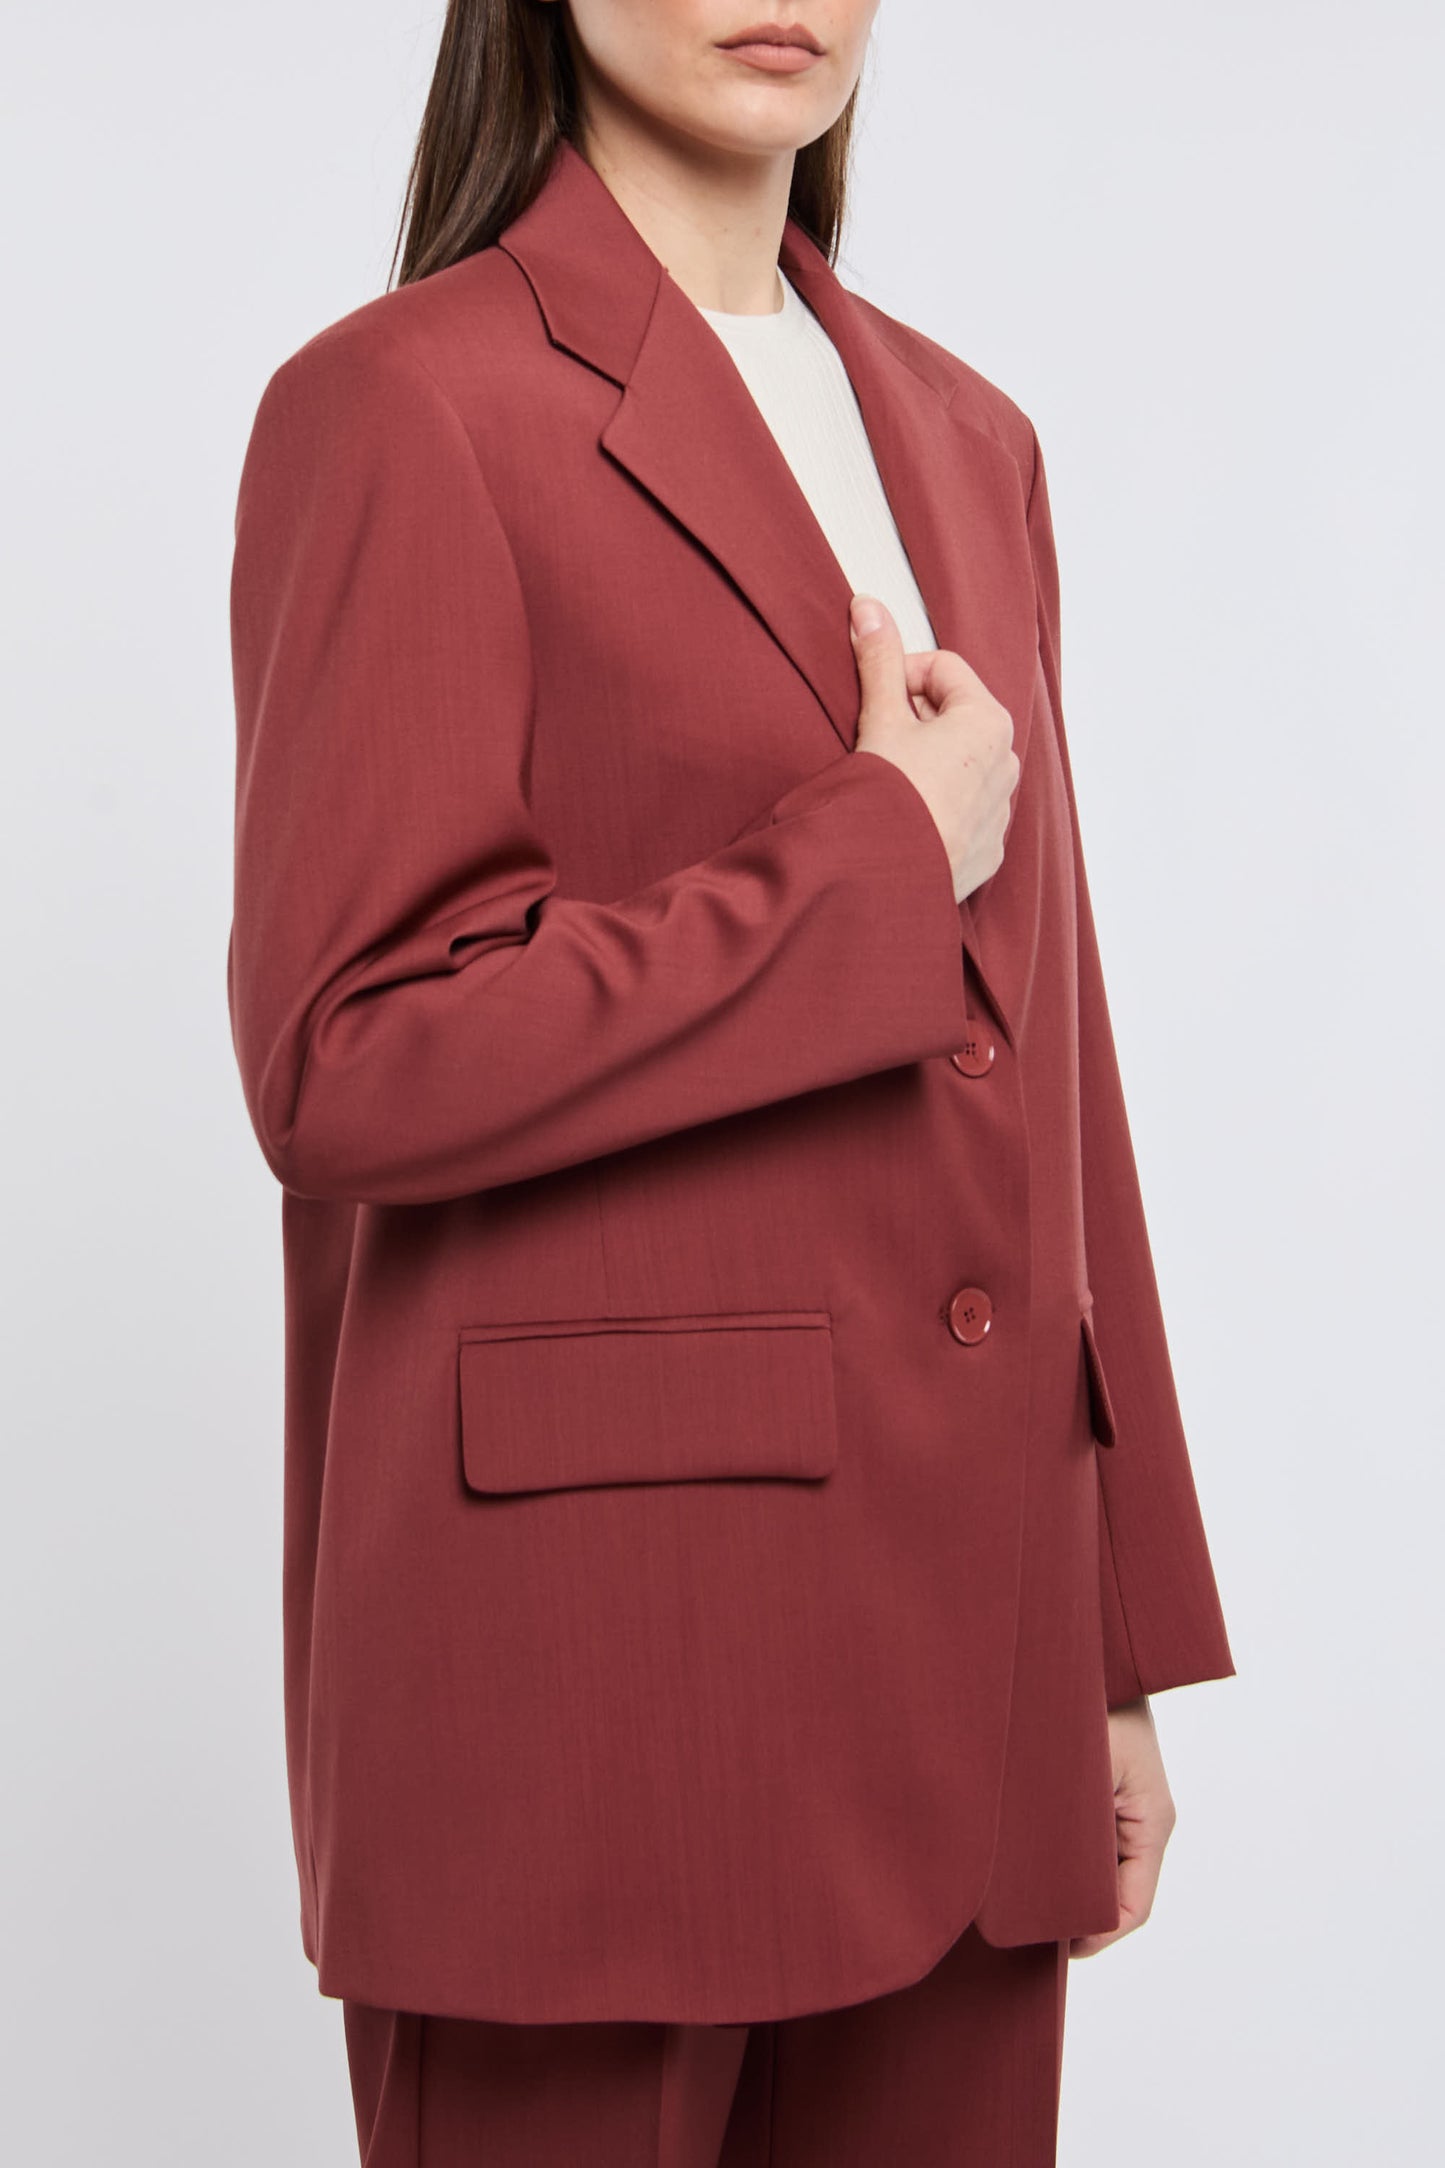  Max Mara Weekend Giacca 100% Wv Rosso Rosso Donna - 4